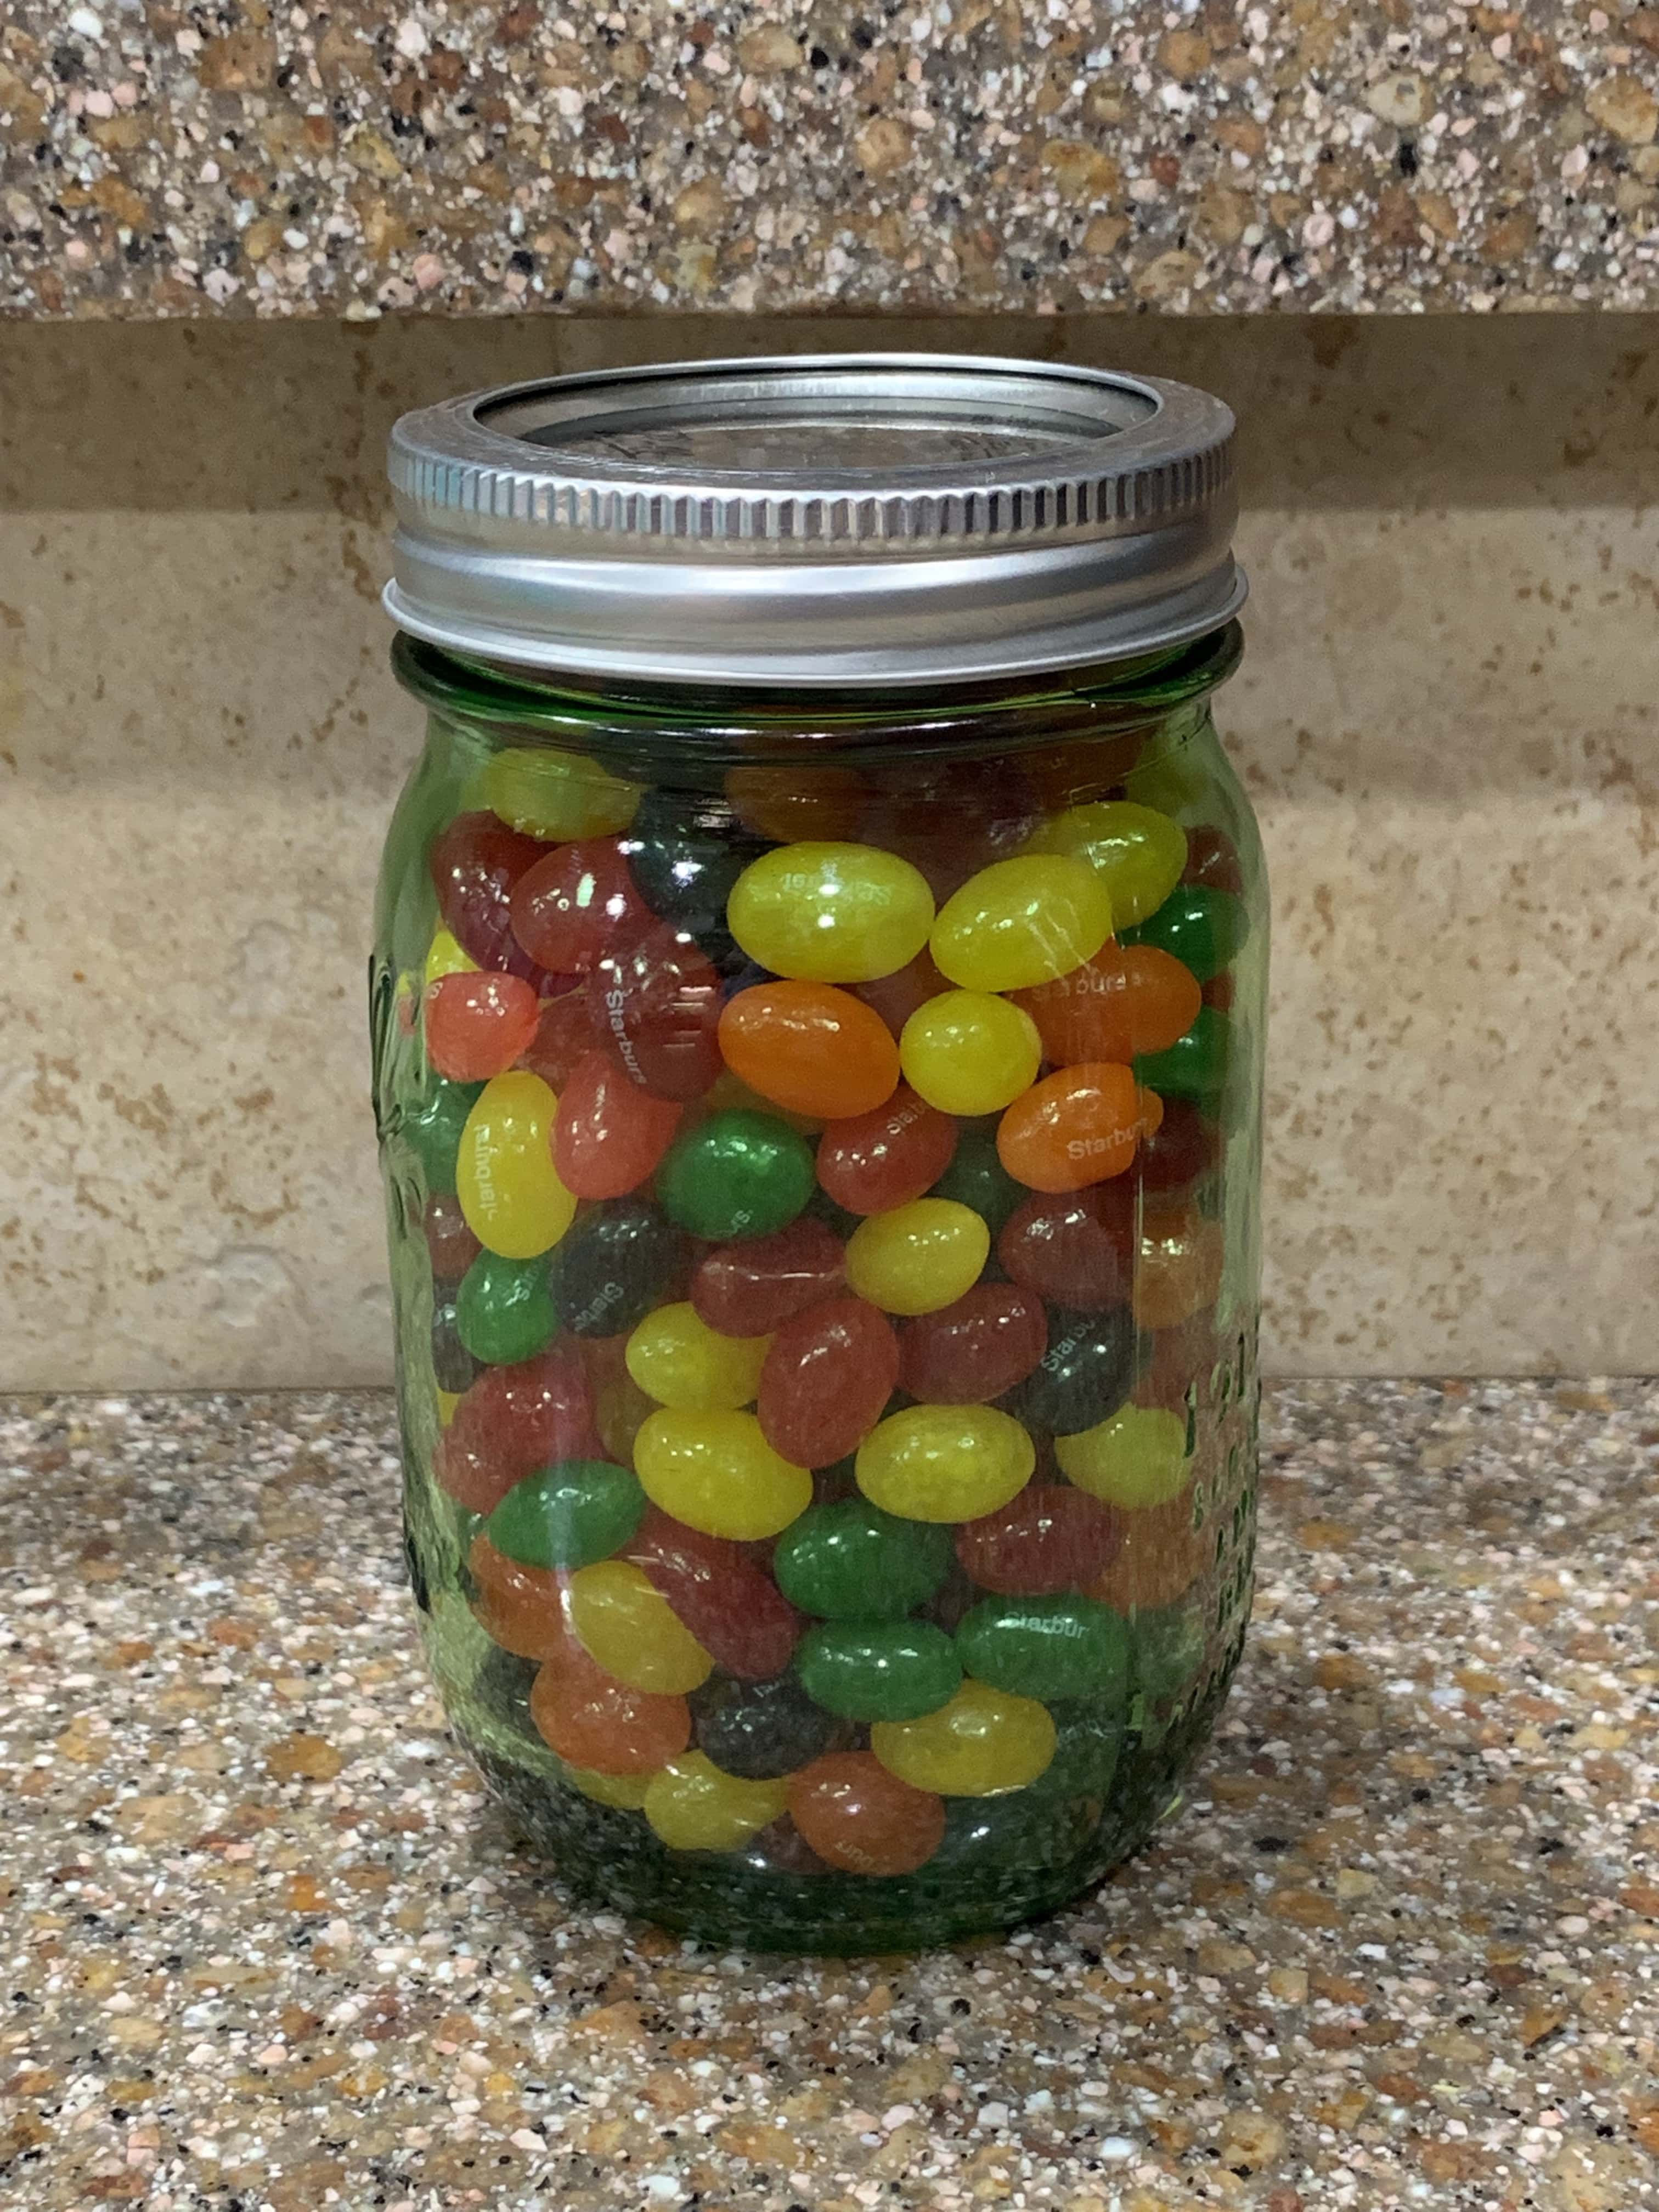 win-miranda-lambert-tickets-guess-how-many-jelly-beans-are-in-this-jar